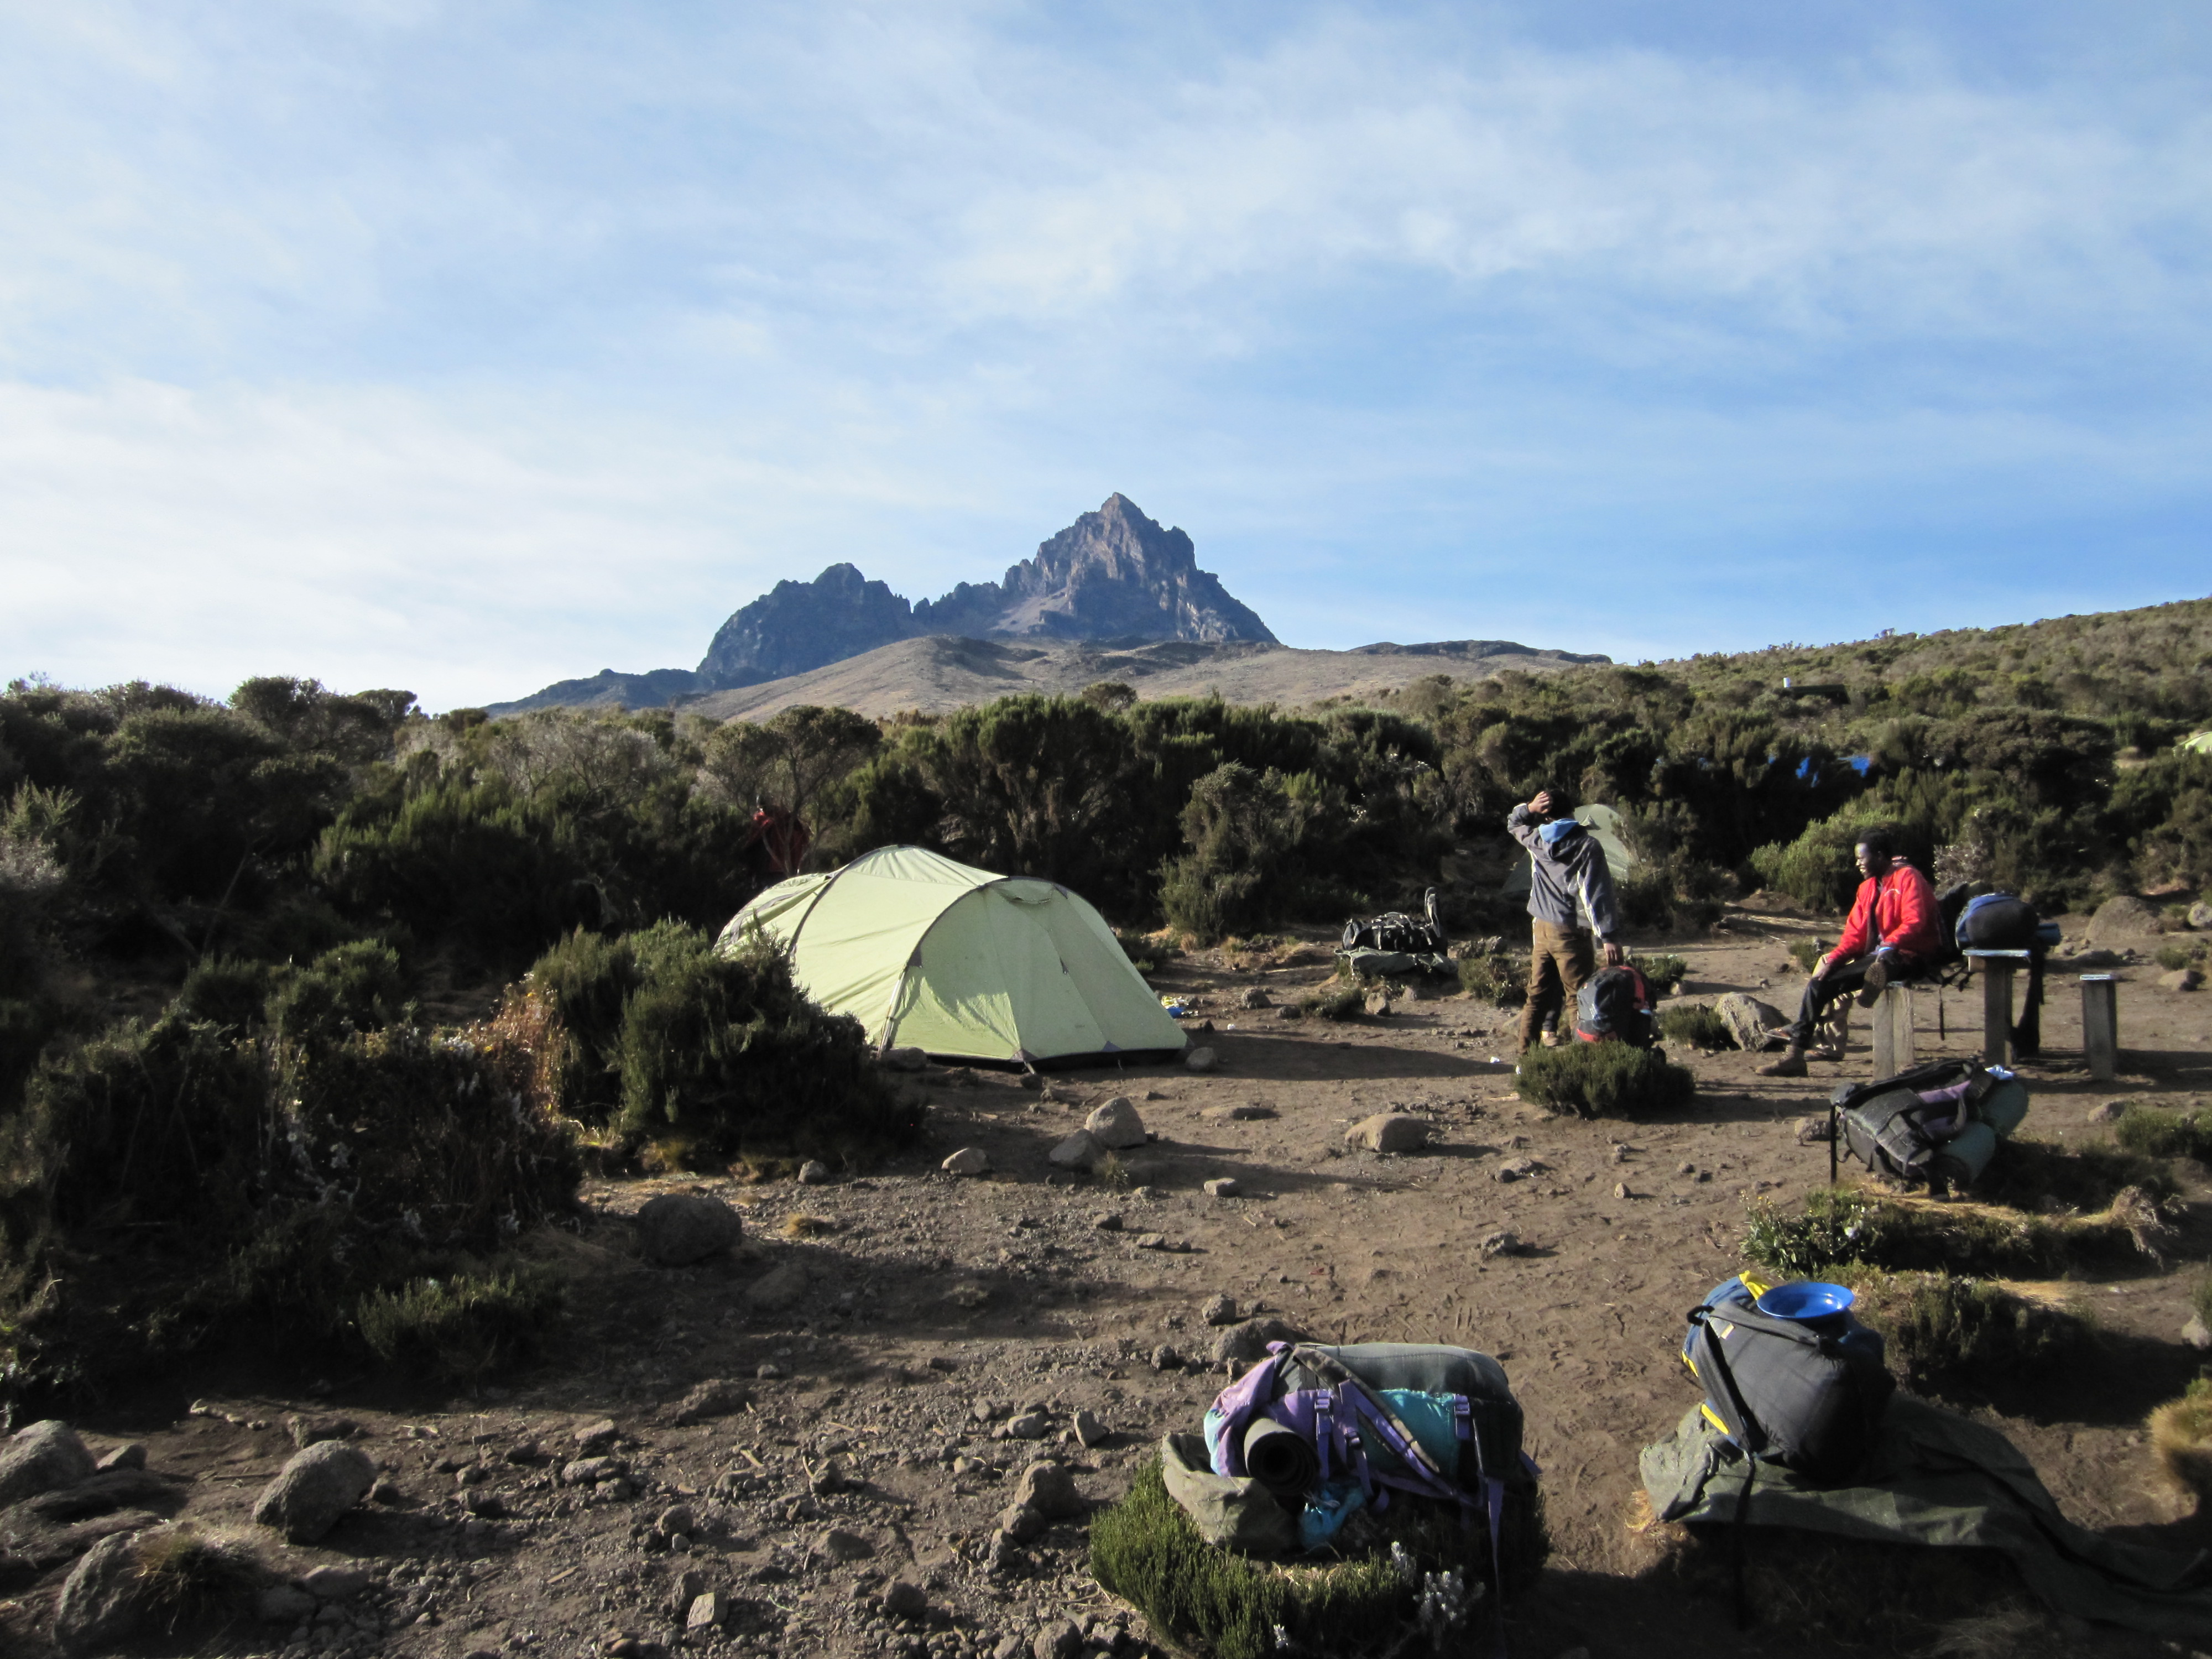 View of our destination from Kikelewa Camp in the morning